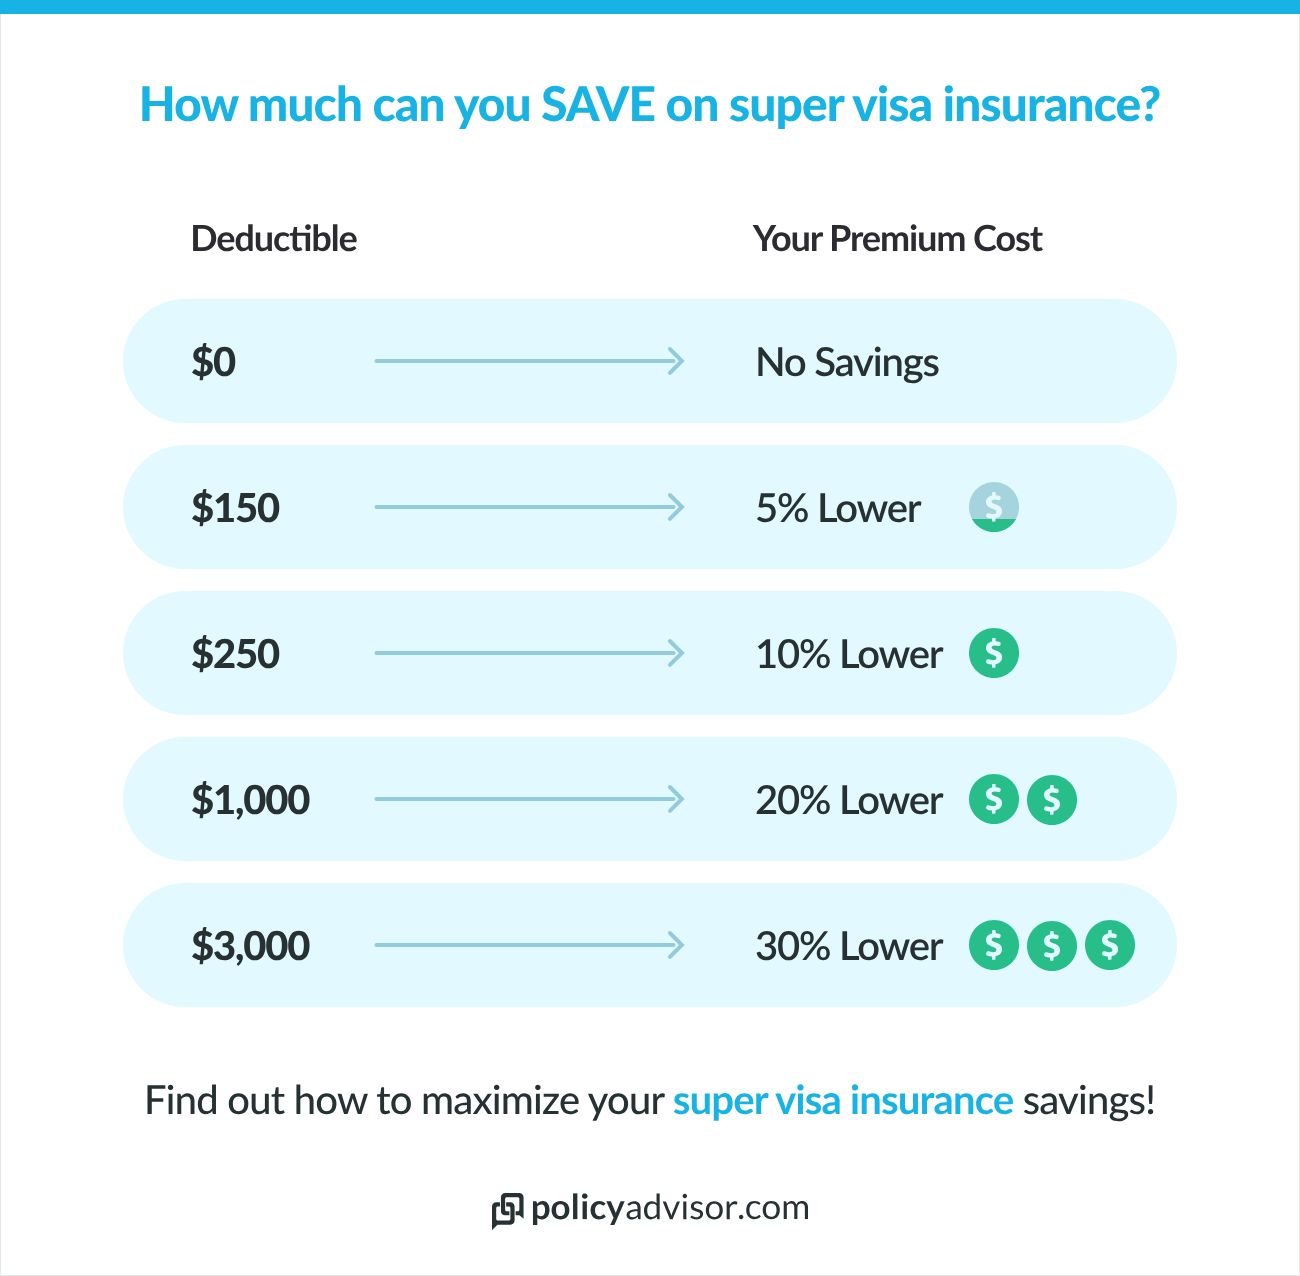 The bigger your deductible, the more you can save on health insurance for your super visa.